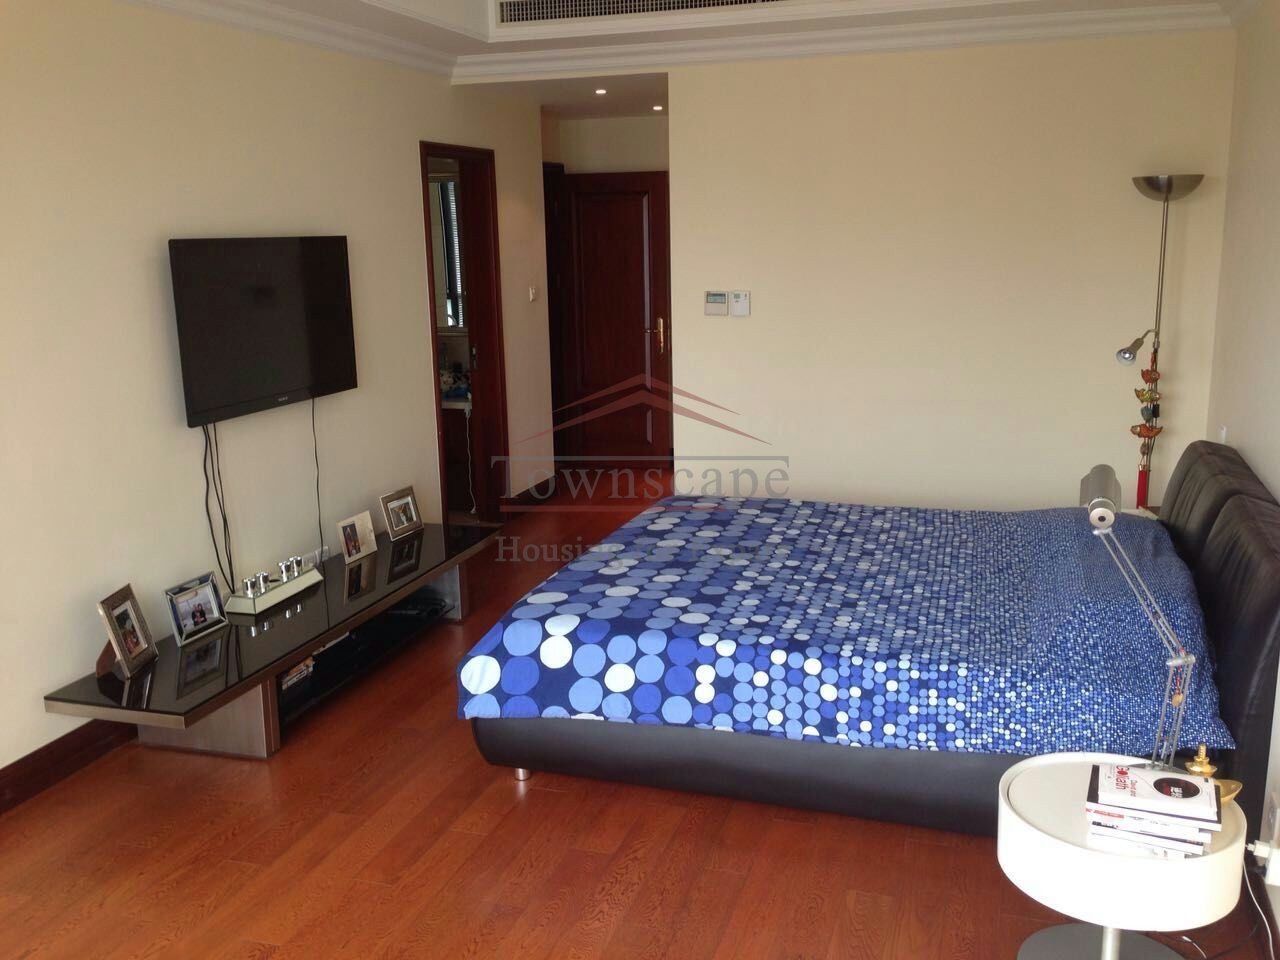  Spacious 3BR apartment with balcony for rent in Hongqiao